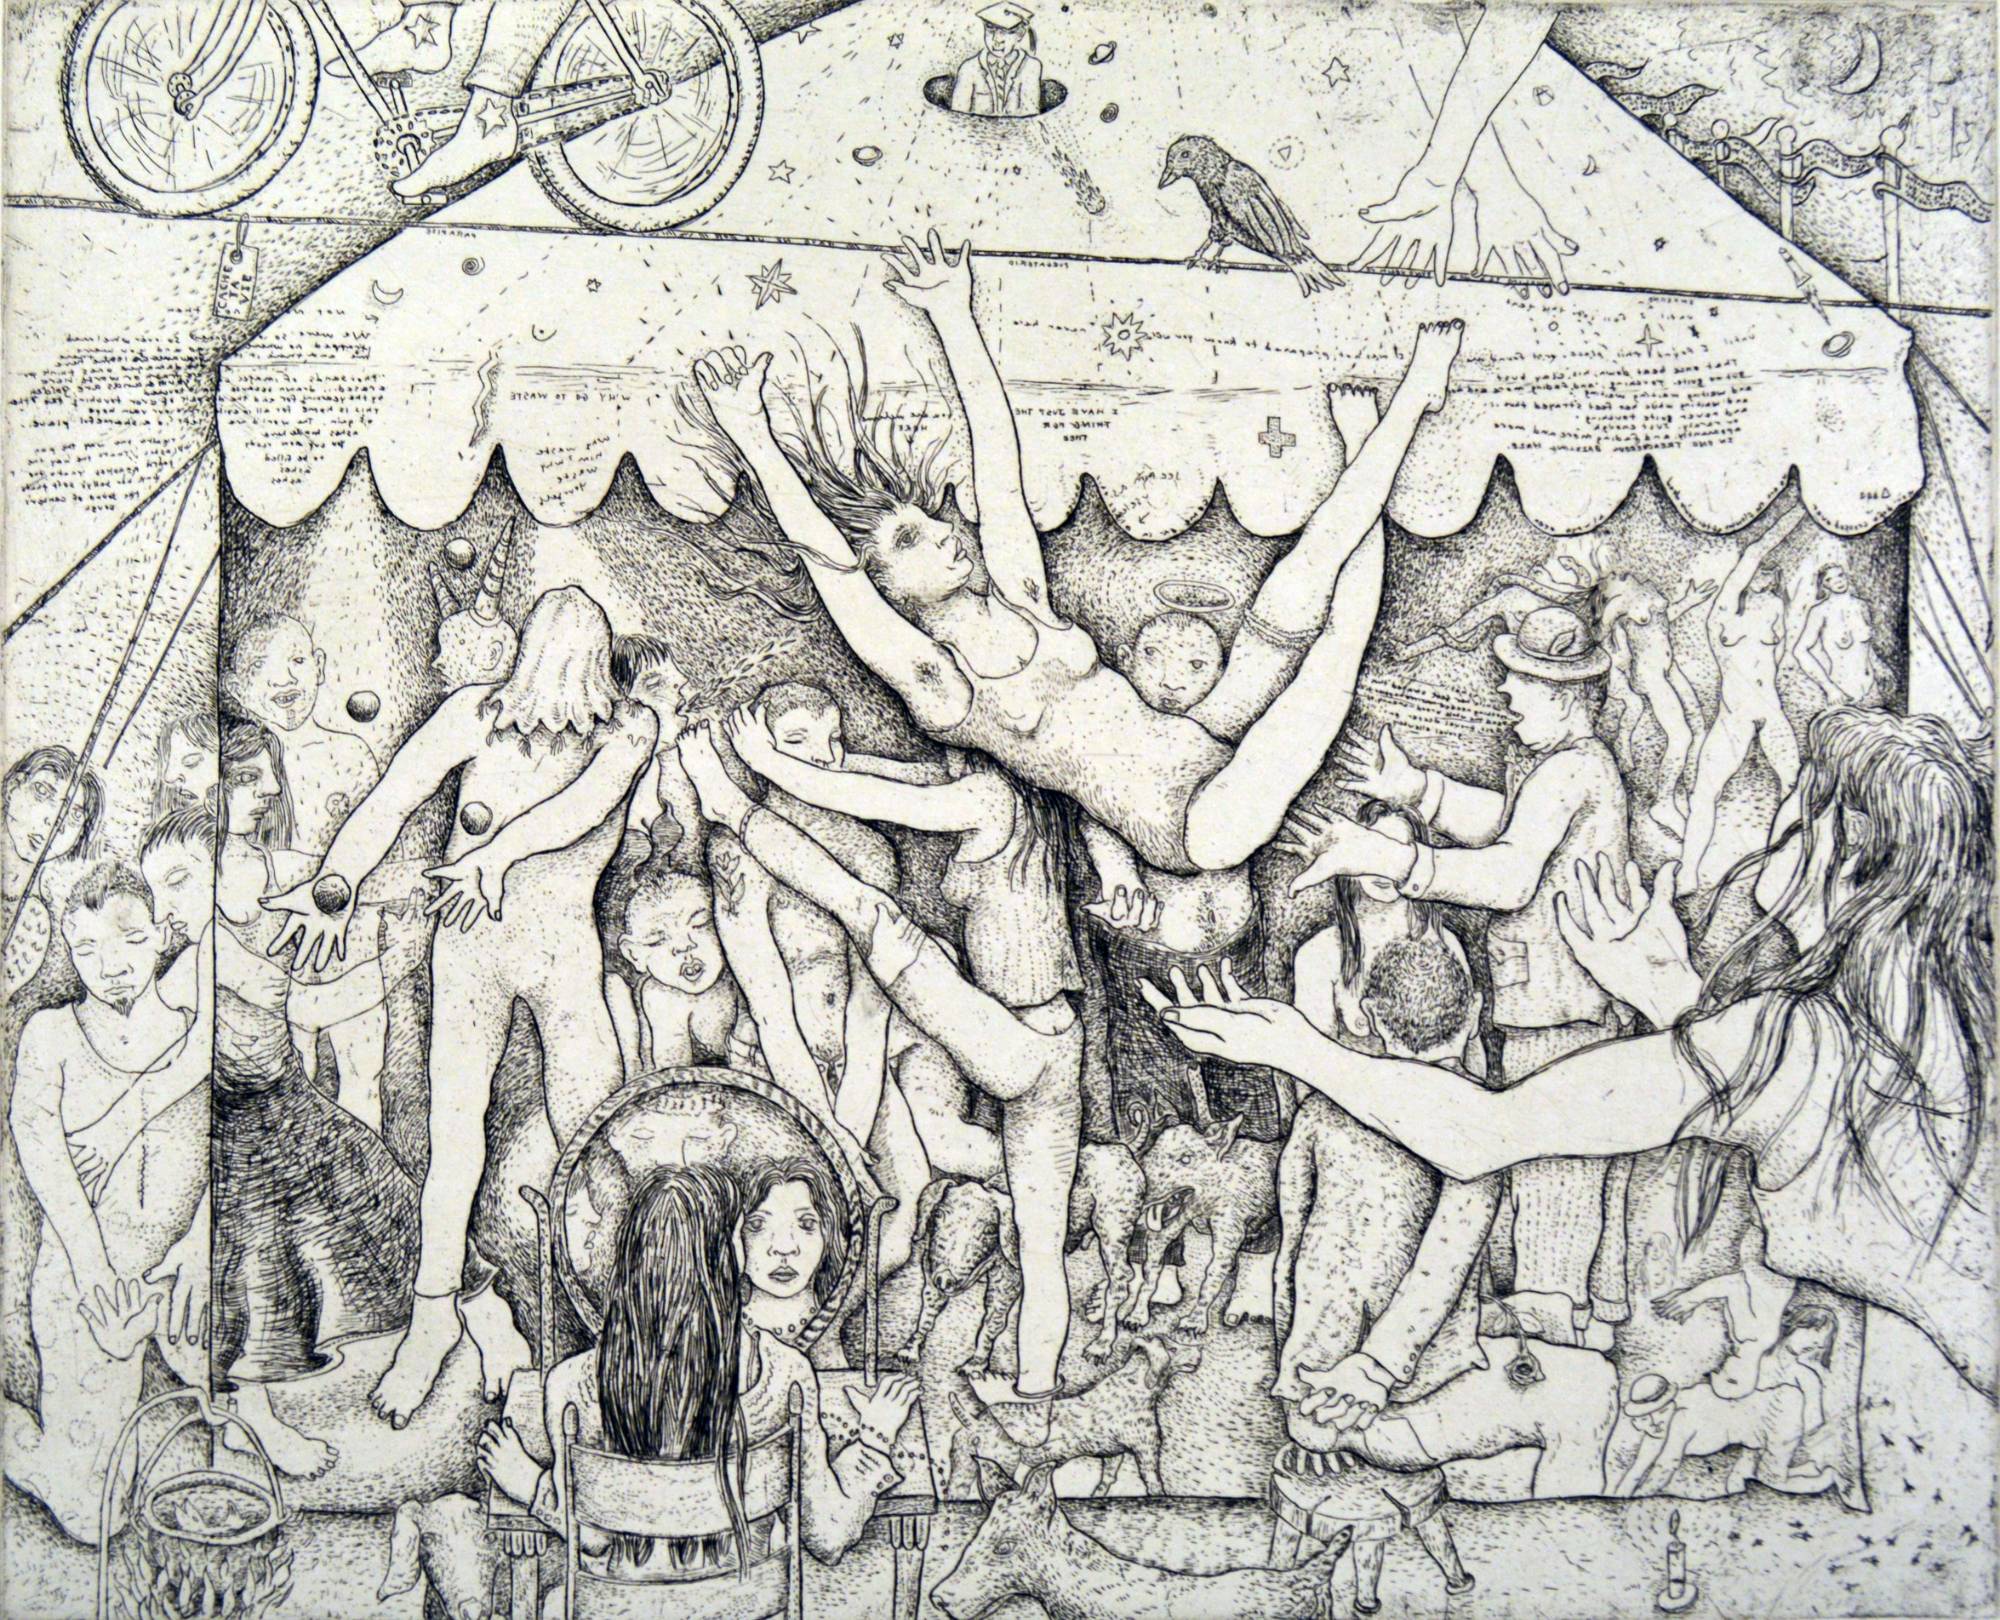 engraving of circus performers